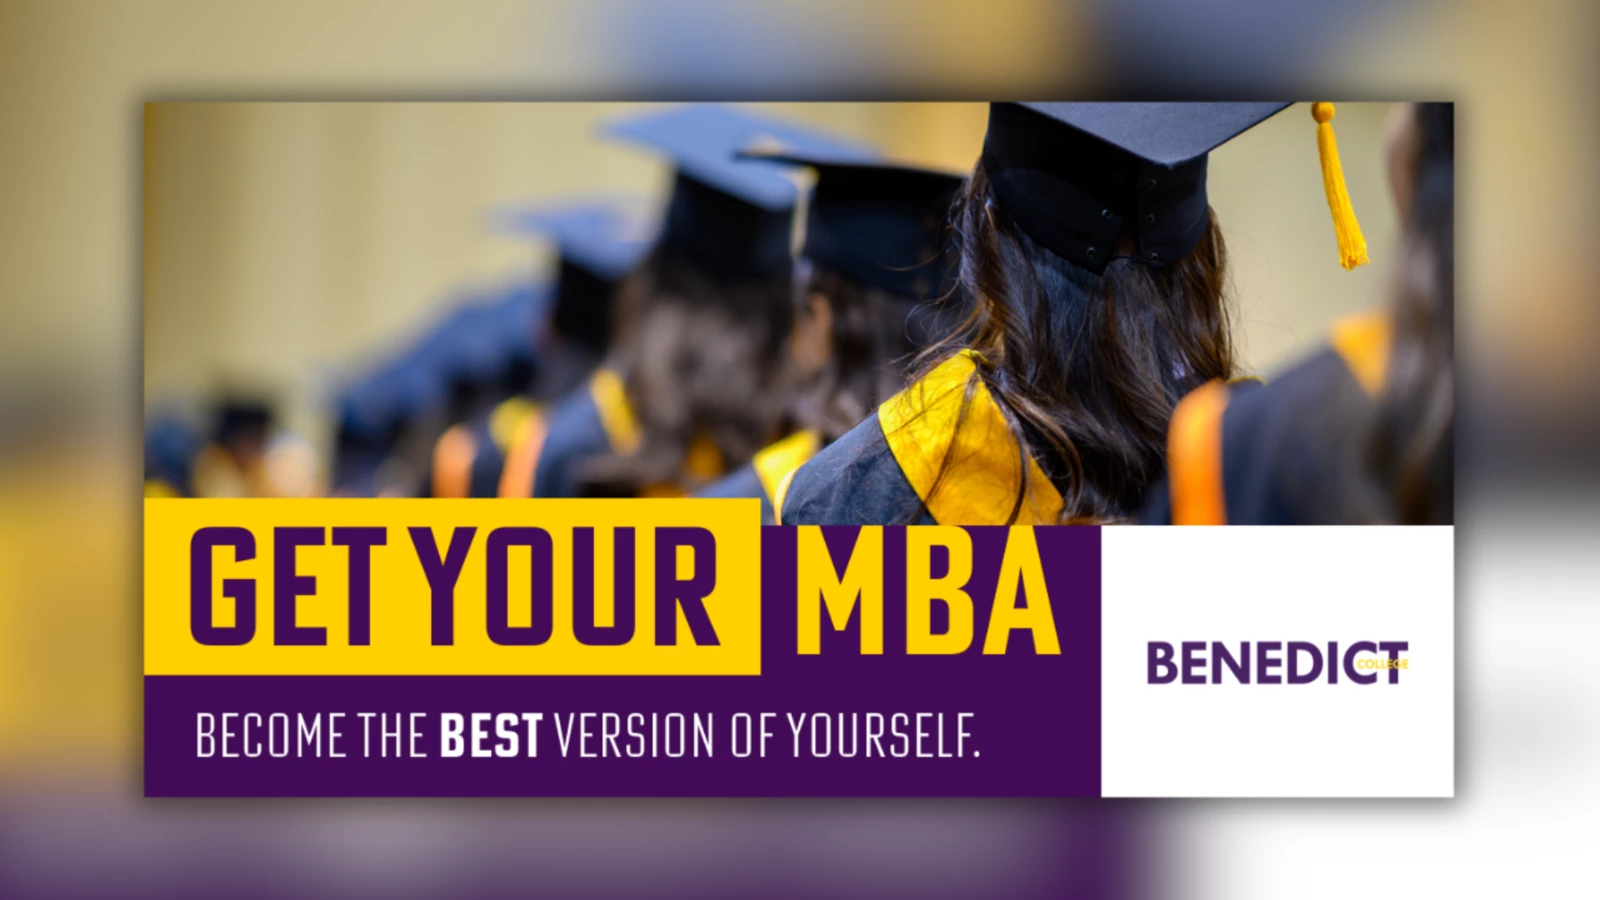 Google Display Ad: Get Your MBA